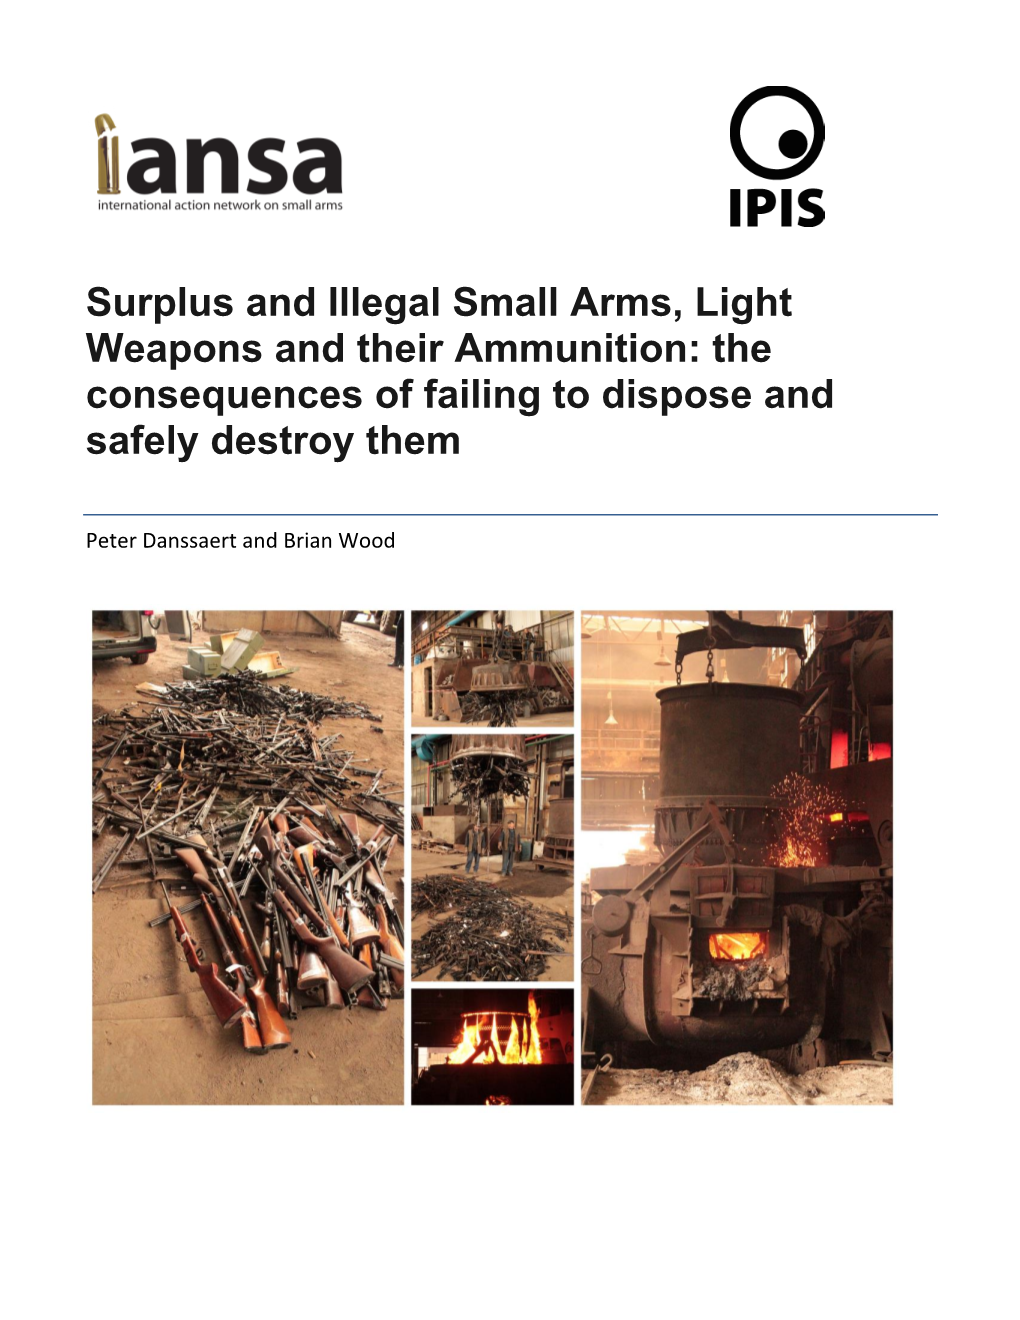 Surplus and Illegal Small Arms, Light Weapons and Their Ammunition: the Consequences of Failing to Dispose and Safely Destroy Them